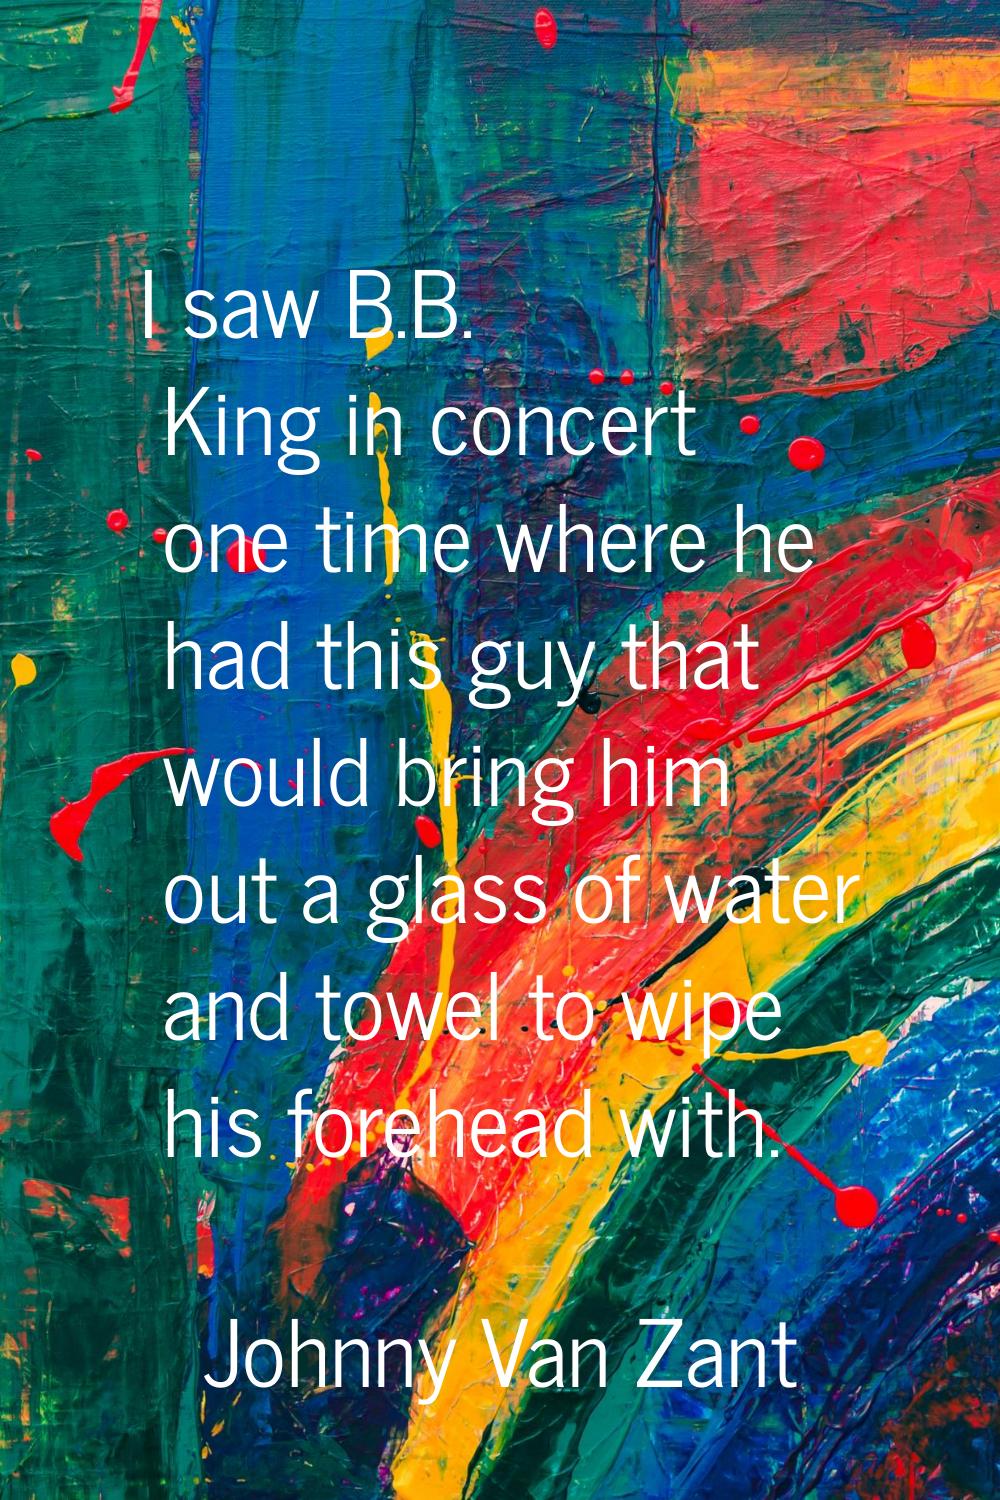 I saw B.B. King in concert one time where he had this guy that would bring him out a glass of water